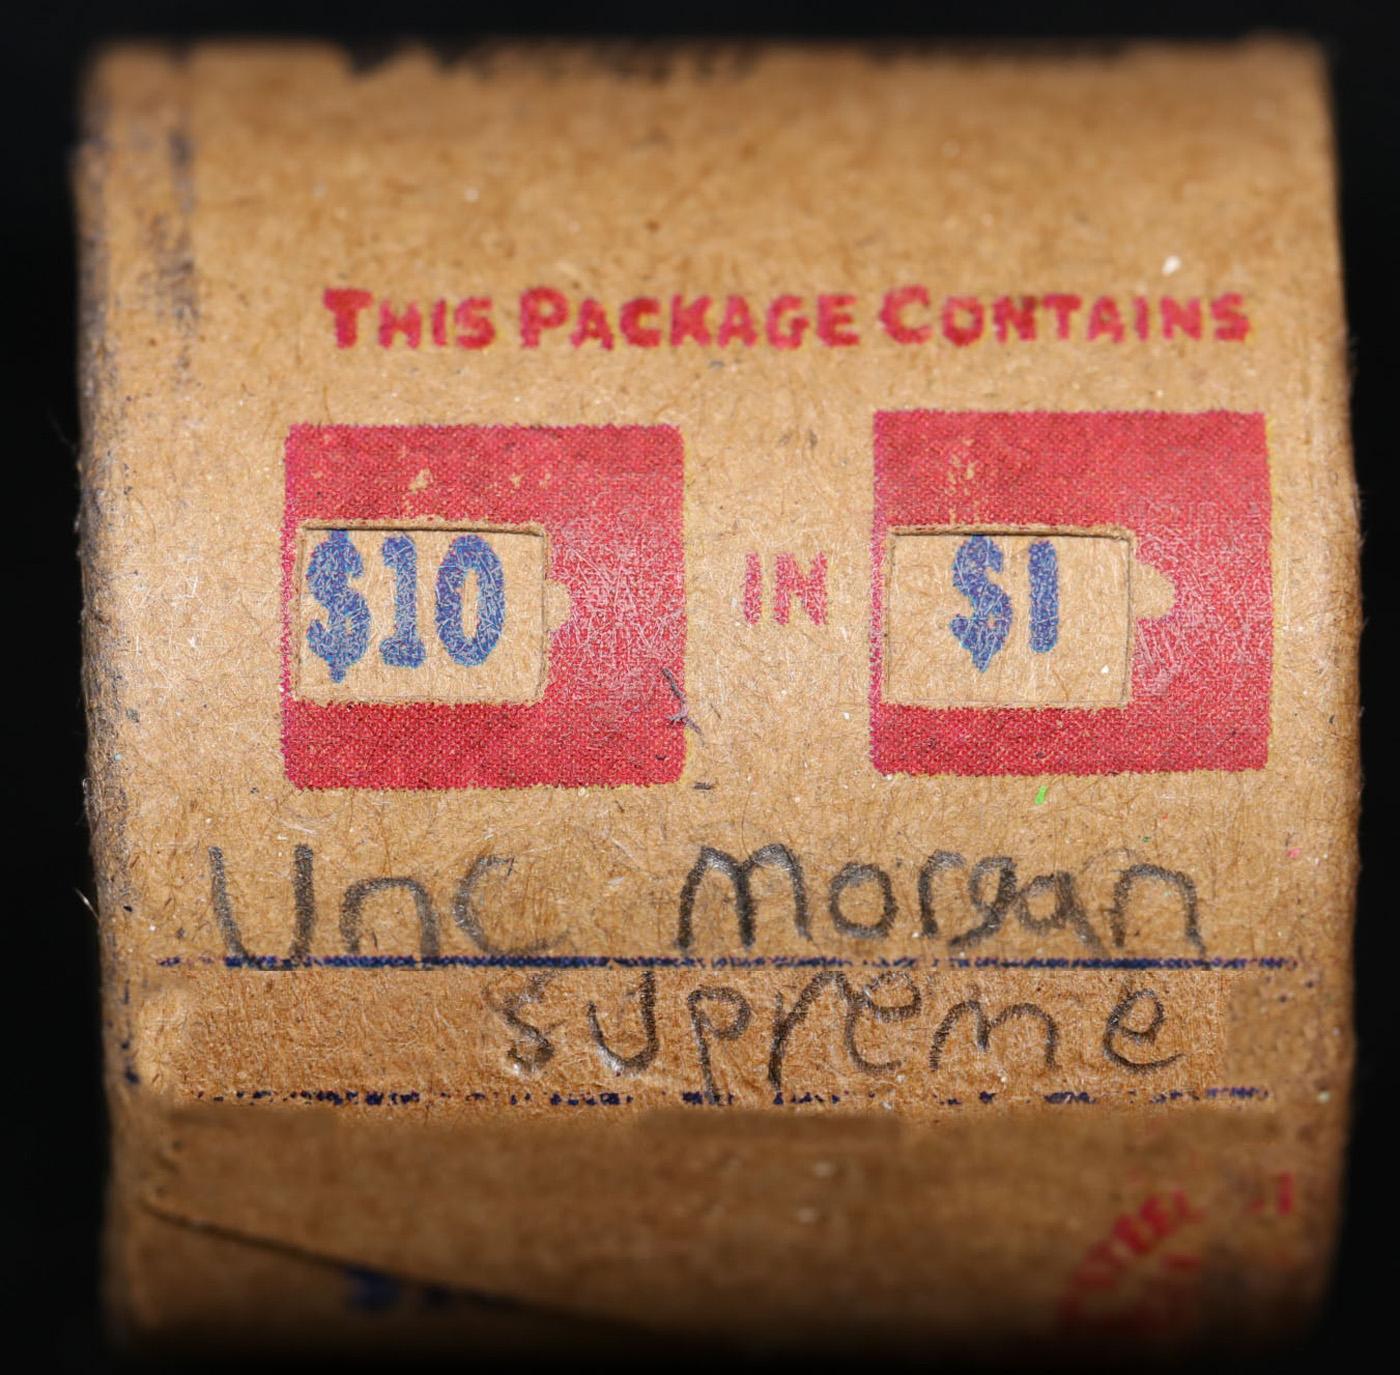 *EXCLUSIVE* x10 Morgan Covered End Roll! Marked "Unc Morgan Premium"! - Huge Vault Hoard  (FC)